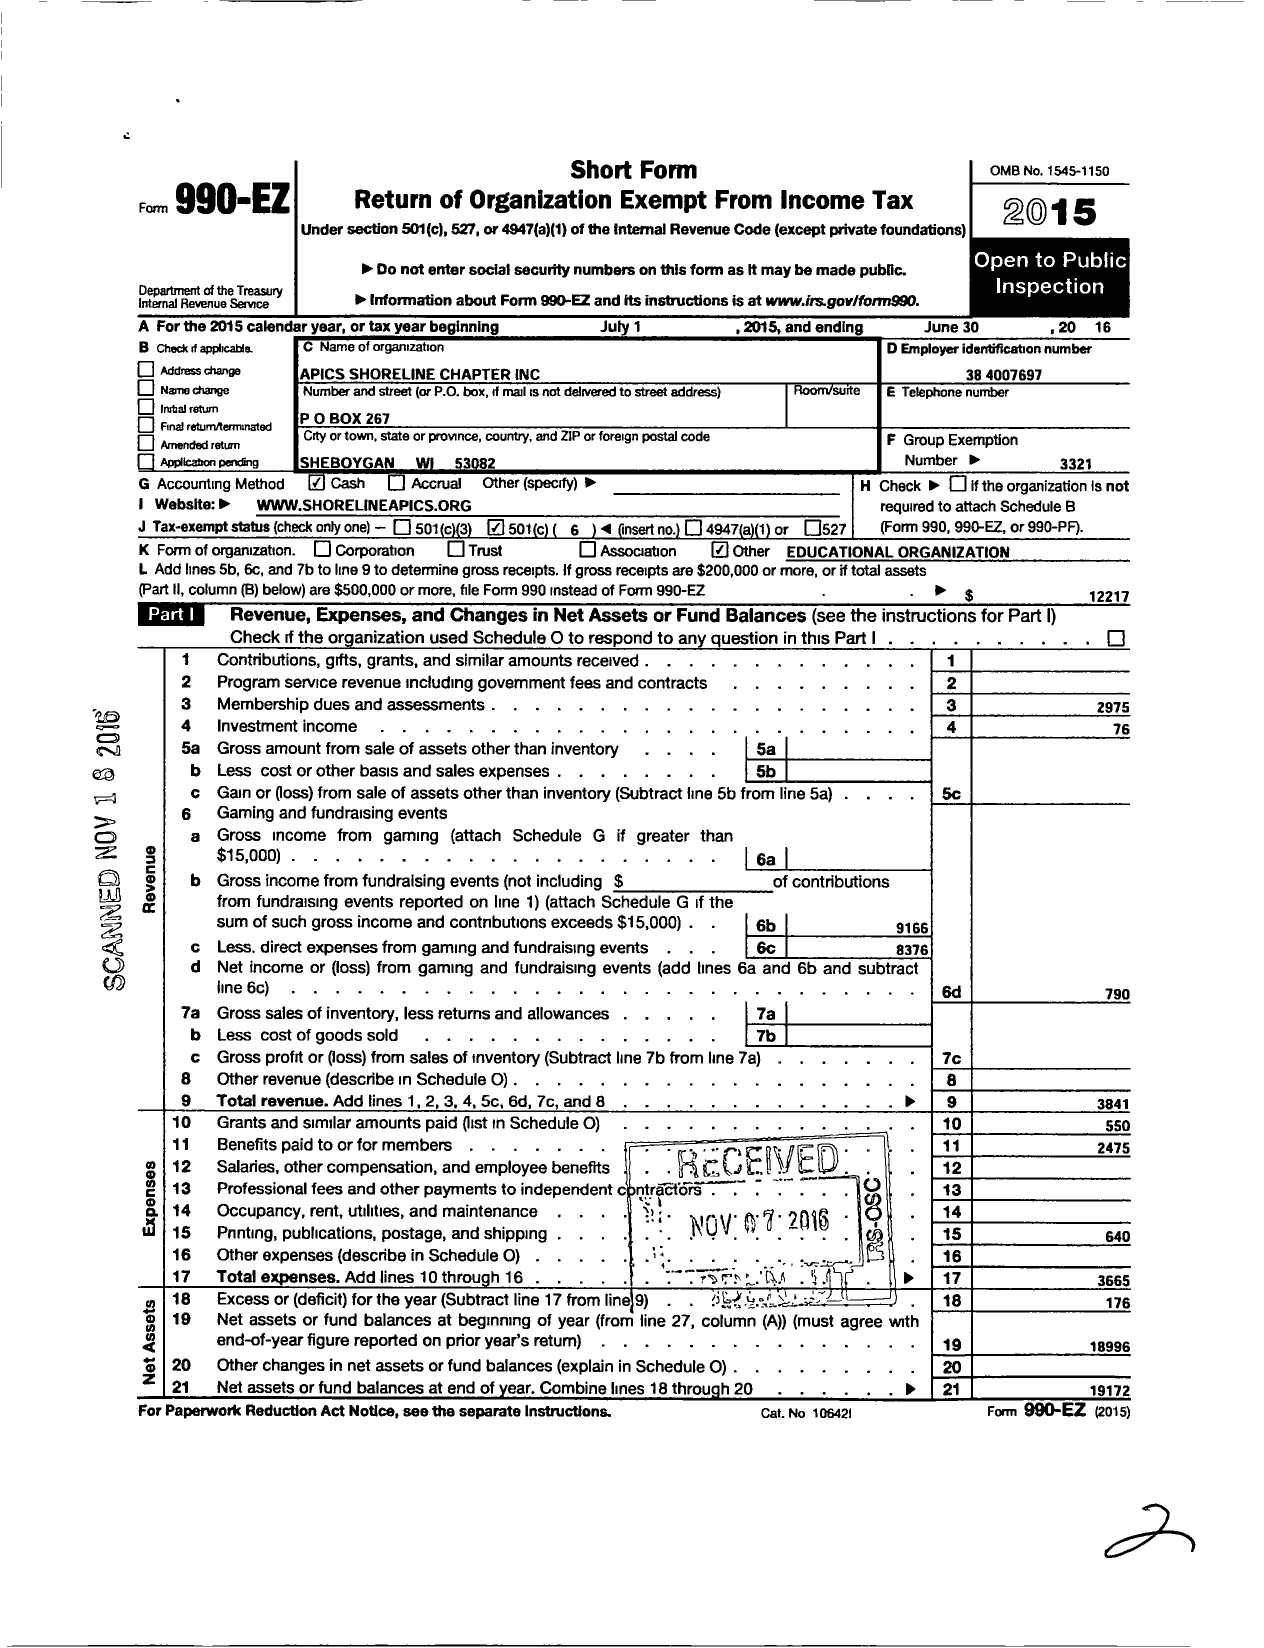 Image of first page of 2015 Form 990EO for American Production and Inventory Control Society Apics Shoreline Chapter